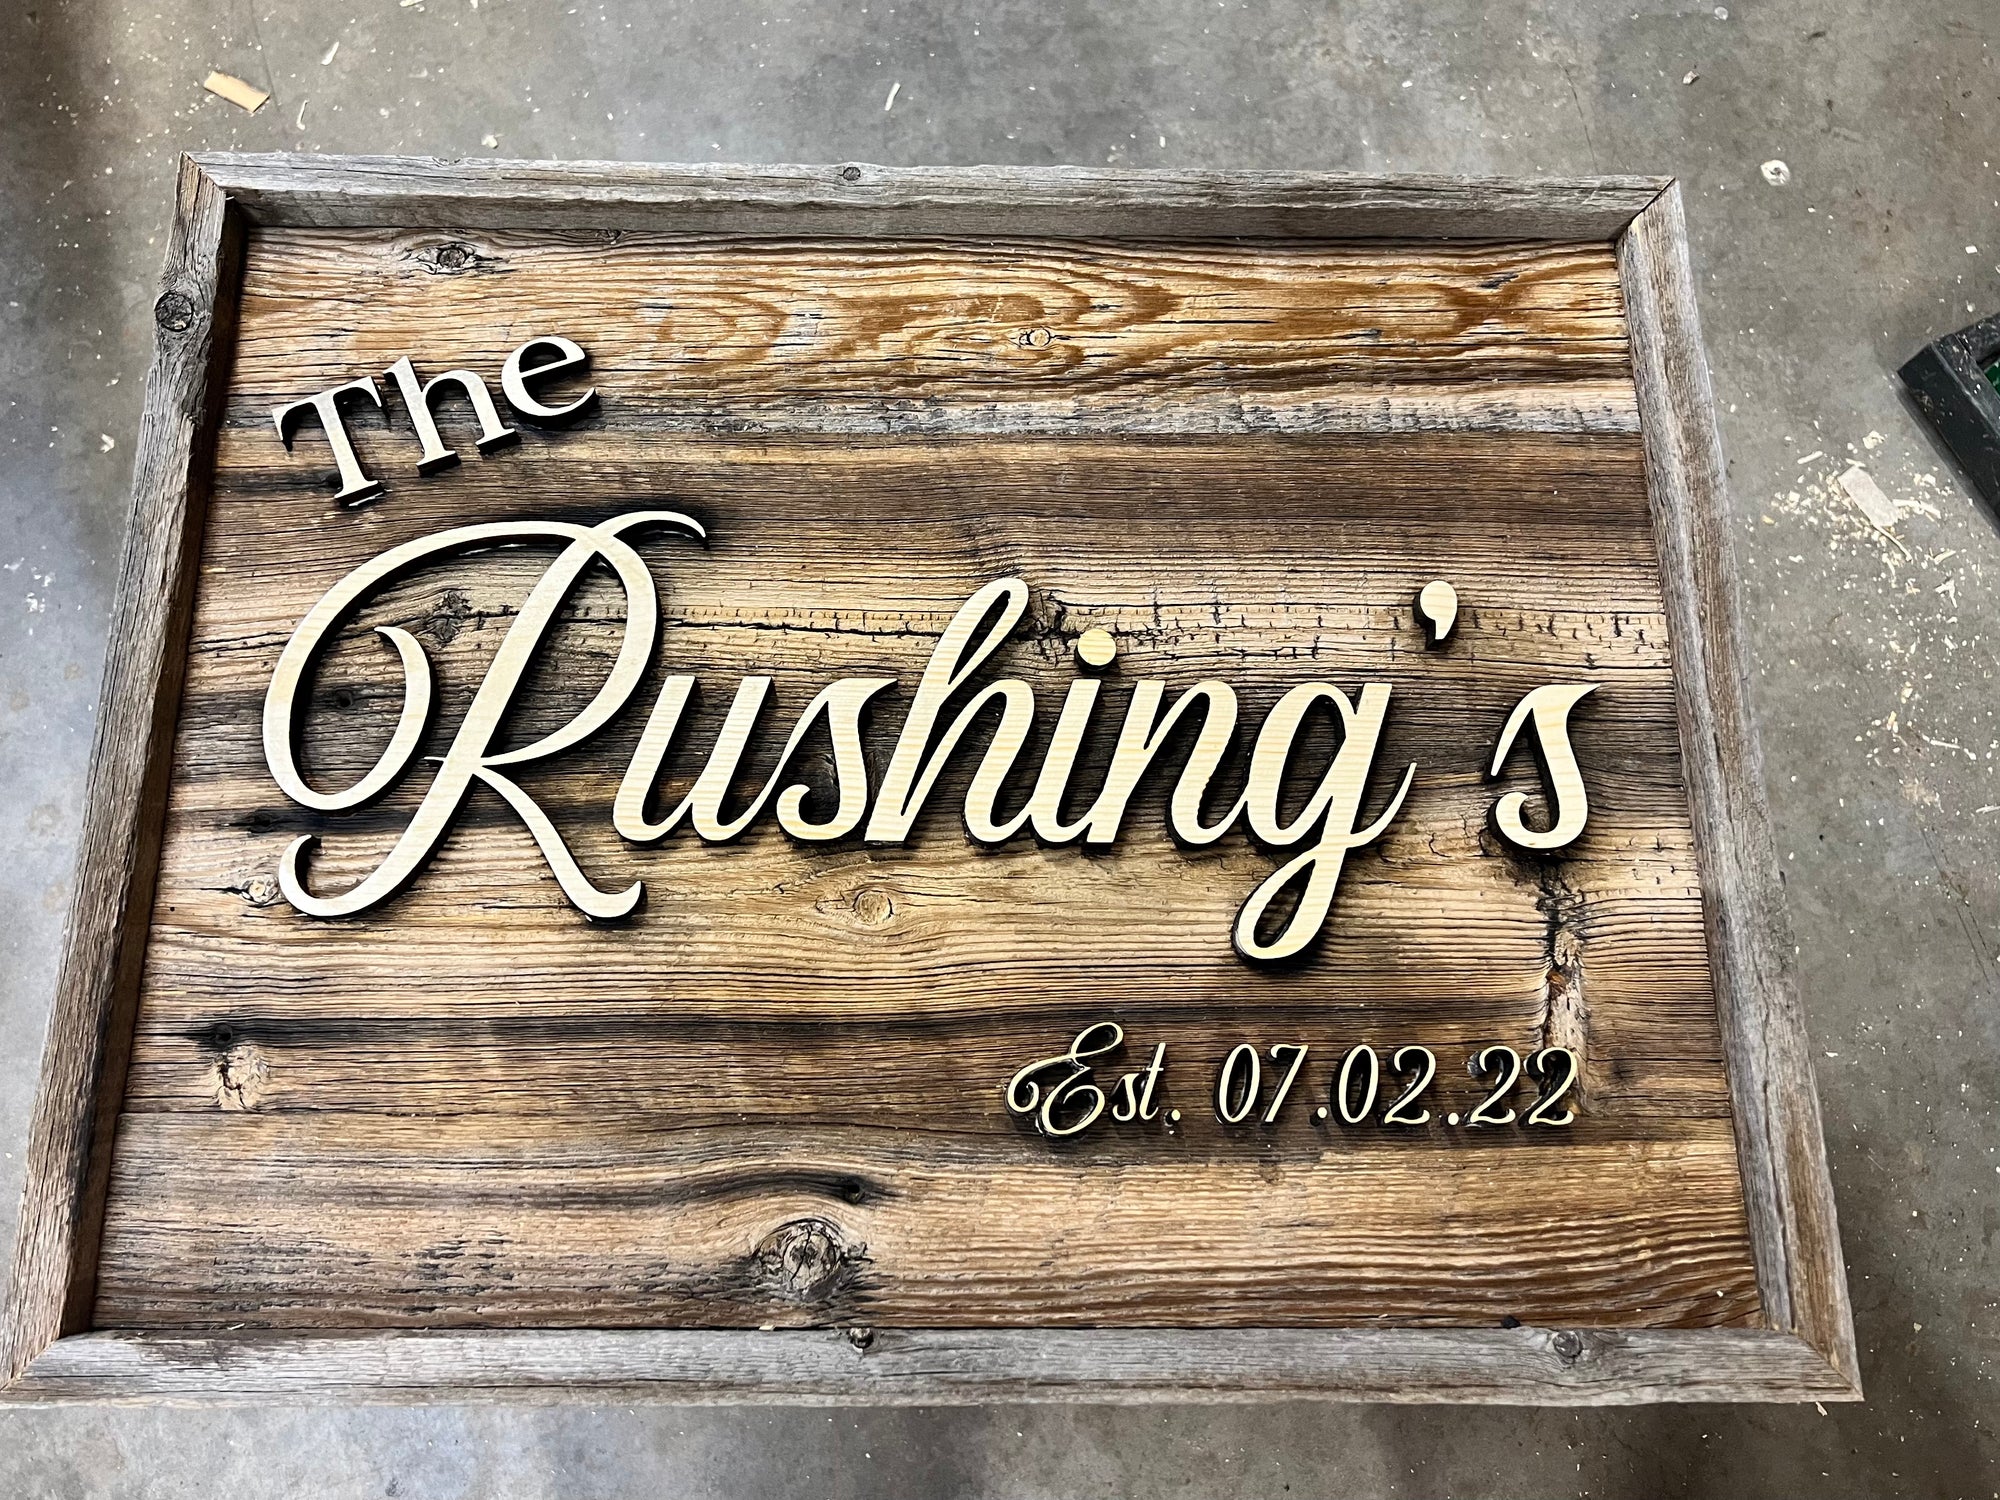 Alternate view of rustic 19x25 inch wedding sign showing last name, made of rustic barn wood with offset inlaid lettering. Custom made to order.